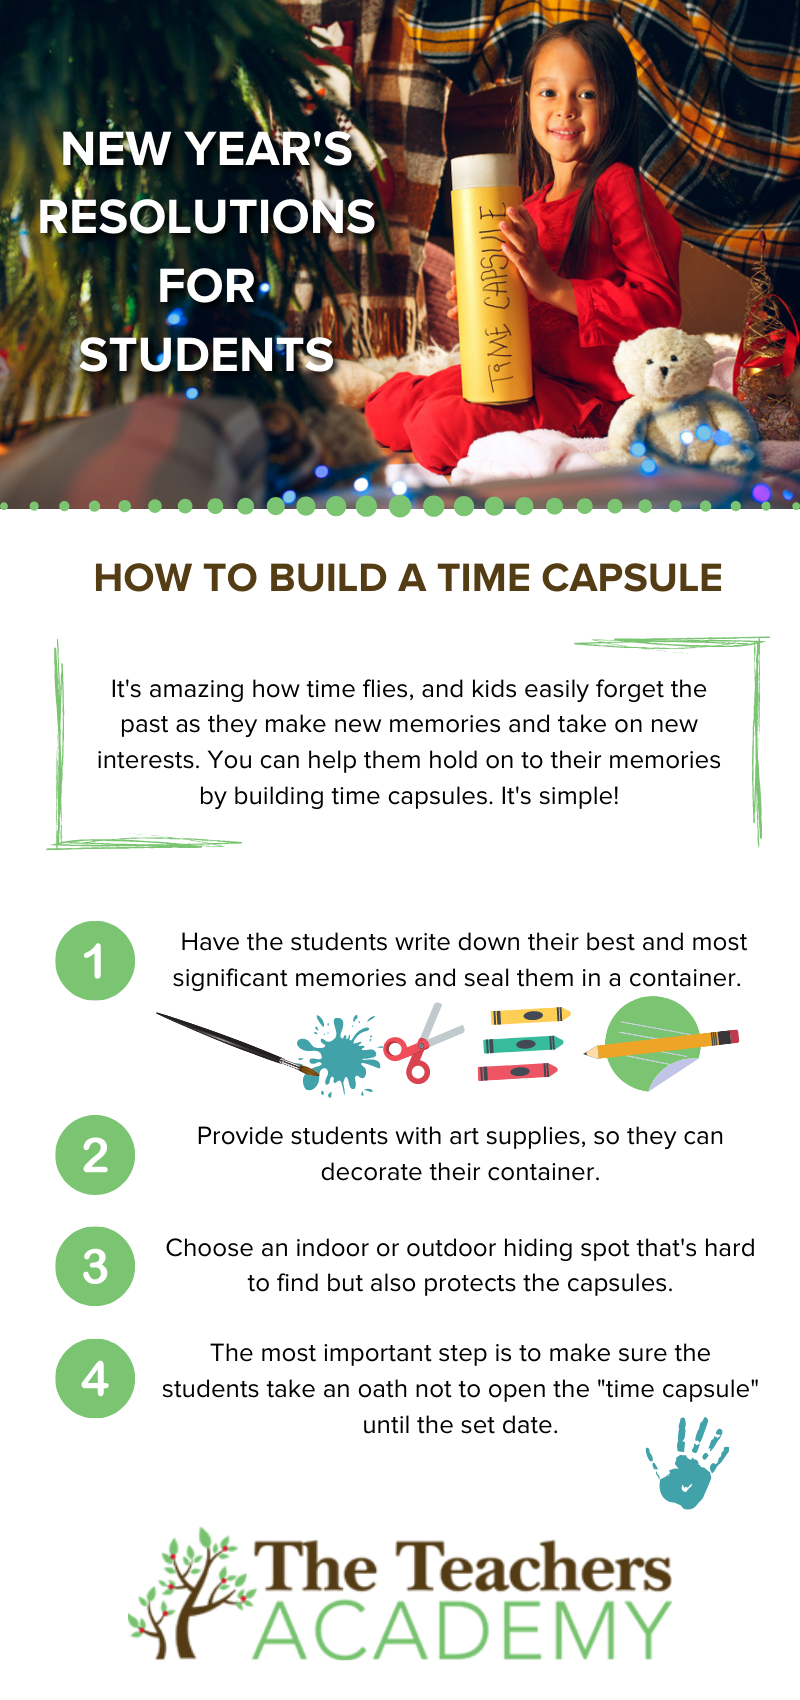 The Teacher's Academy - New Year's Activities for the Classroom- How to Build a New Year's Time Capsule